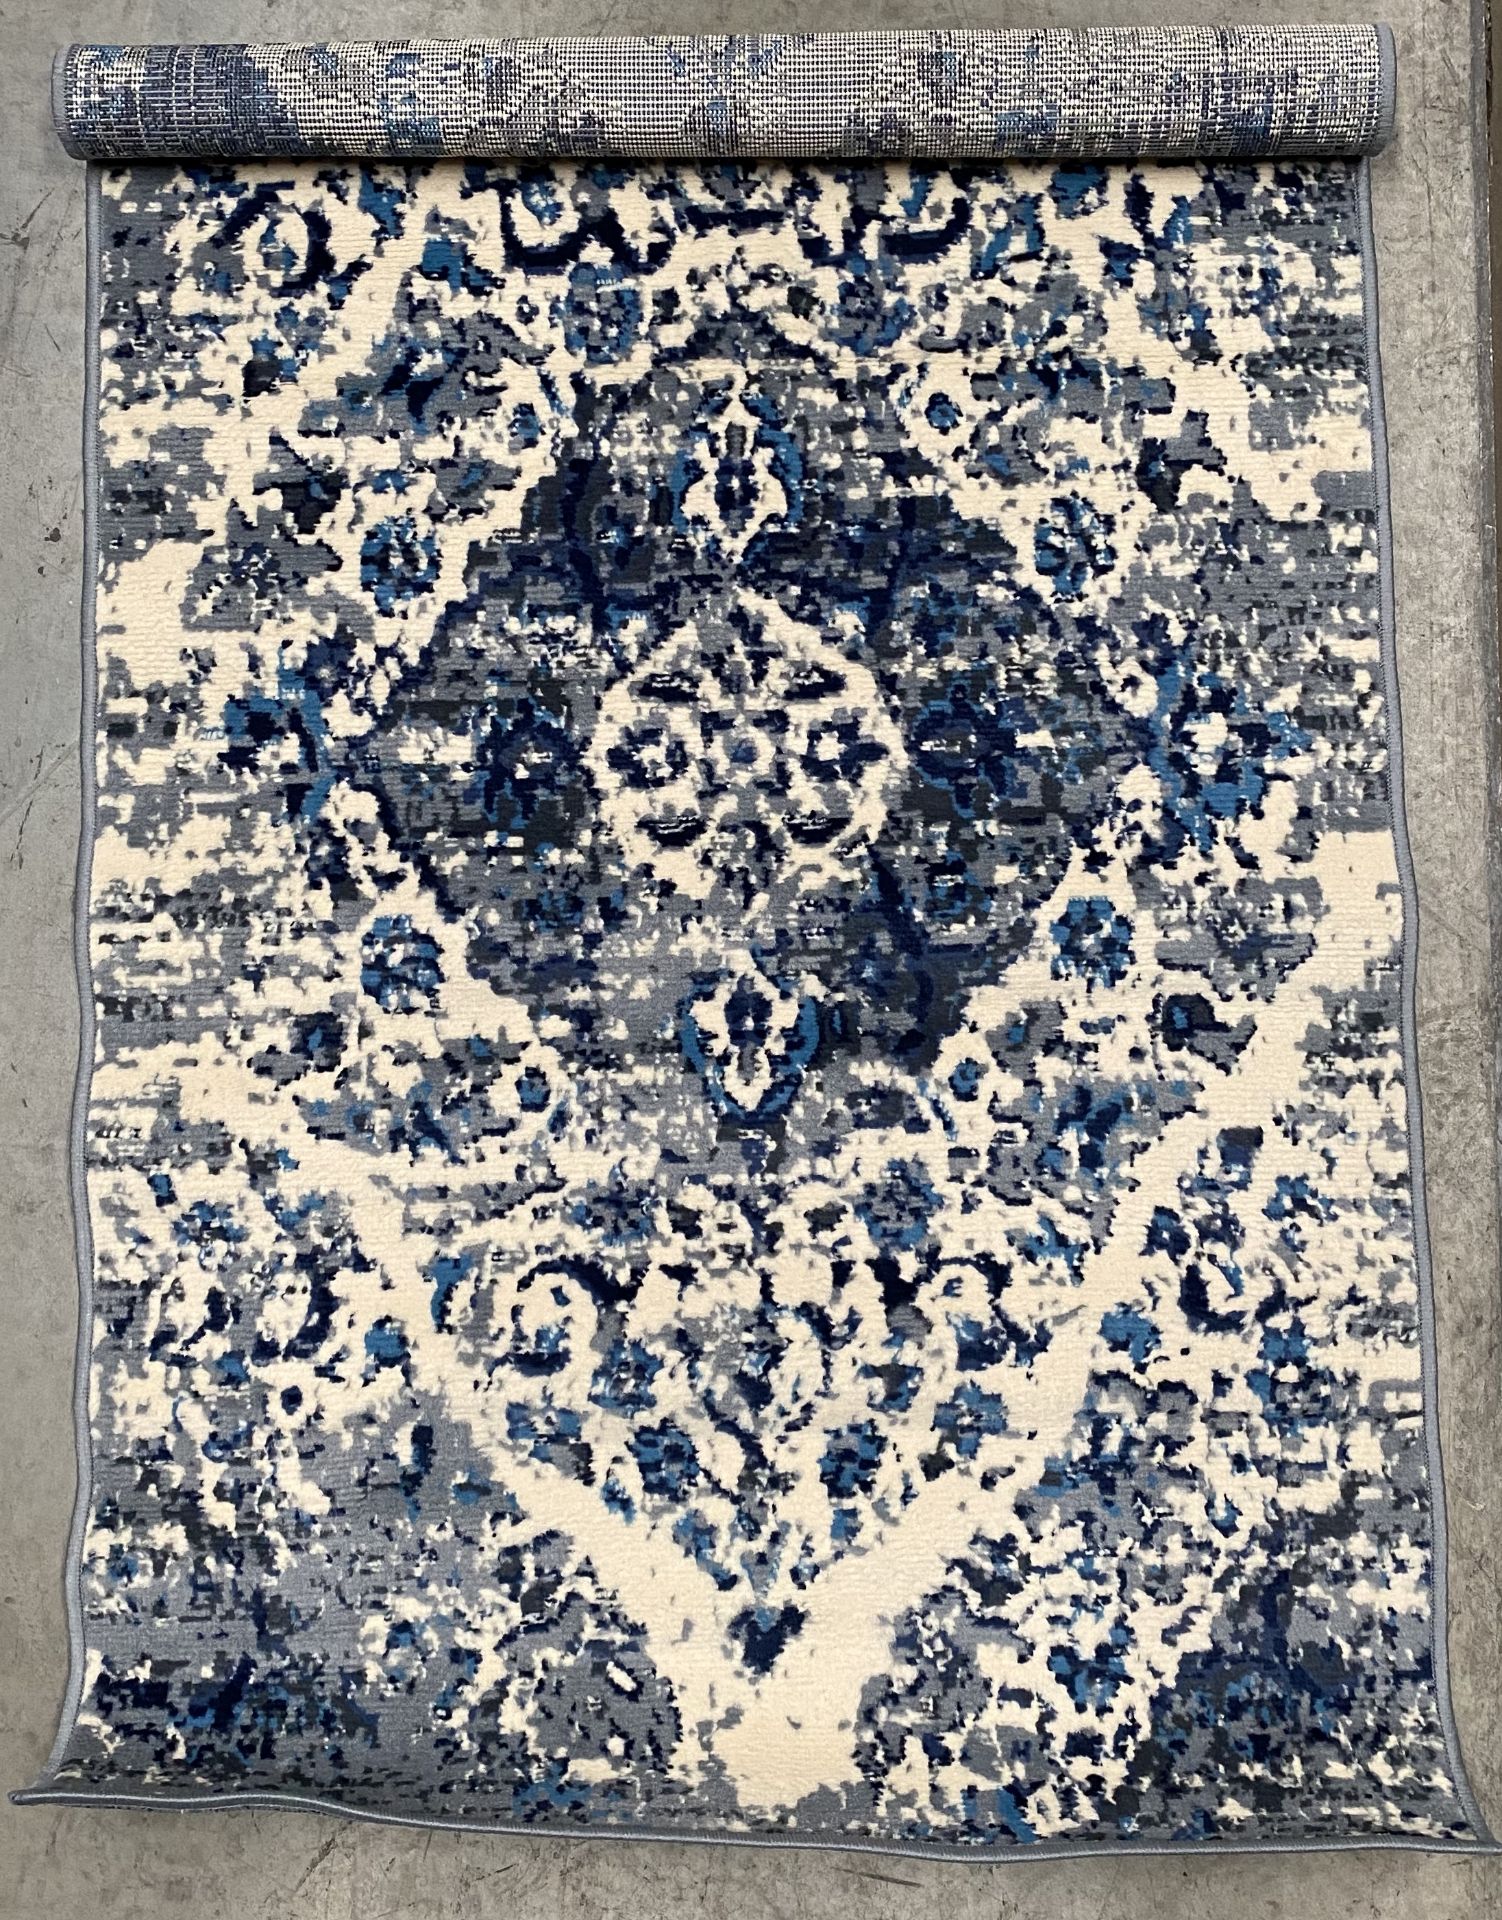 A blue and grey patterned rug - 90cm x 1